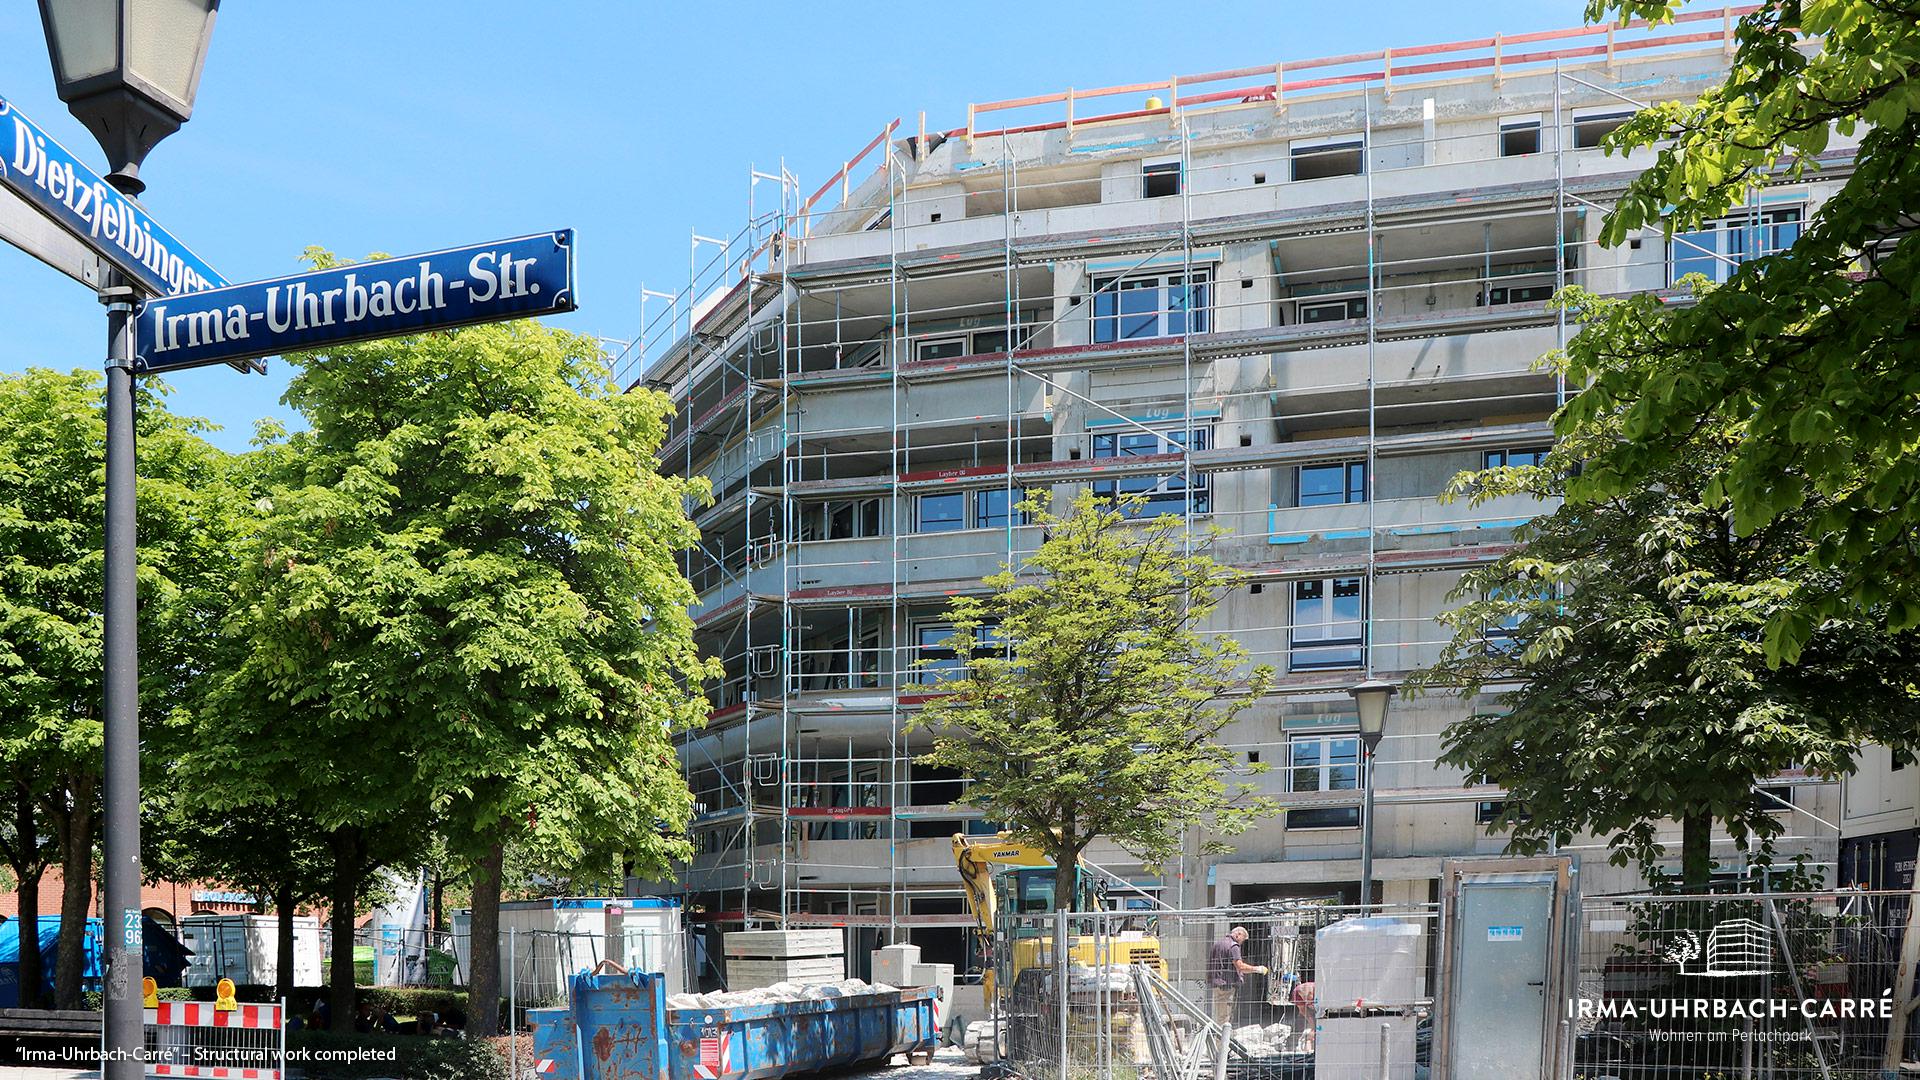 “Irma-Uhrbach-Carré” in Munich’s Perlach Süd district: Structural work completed